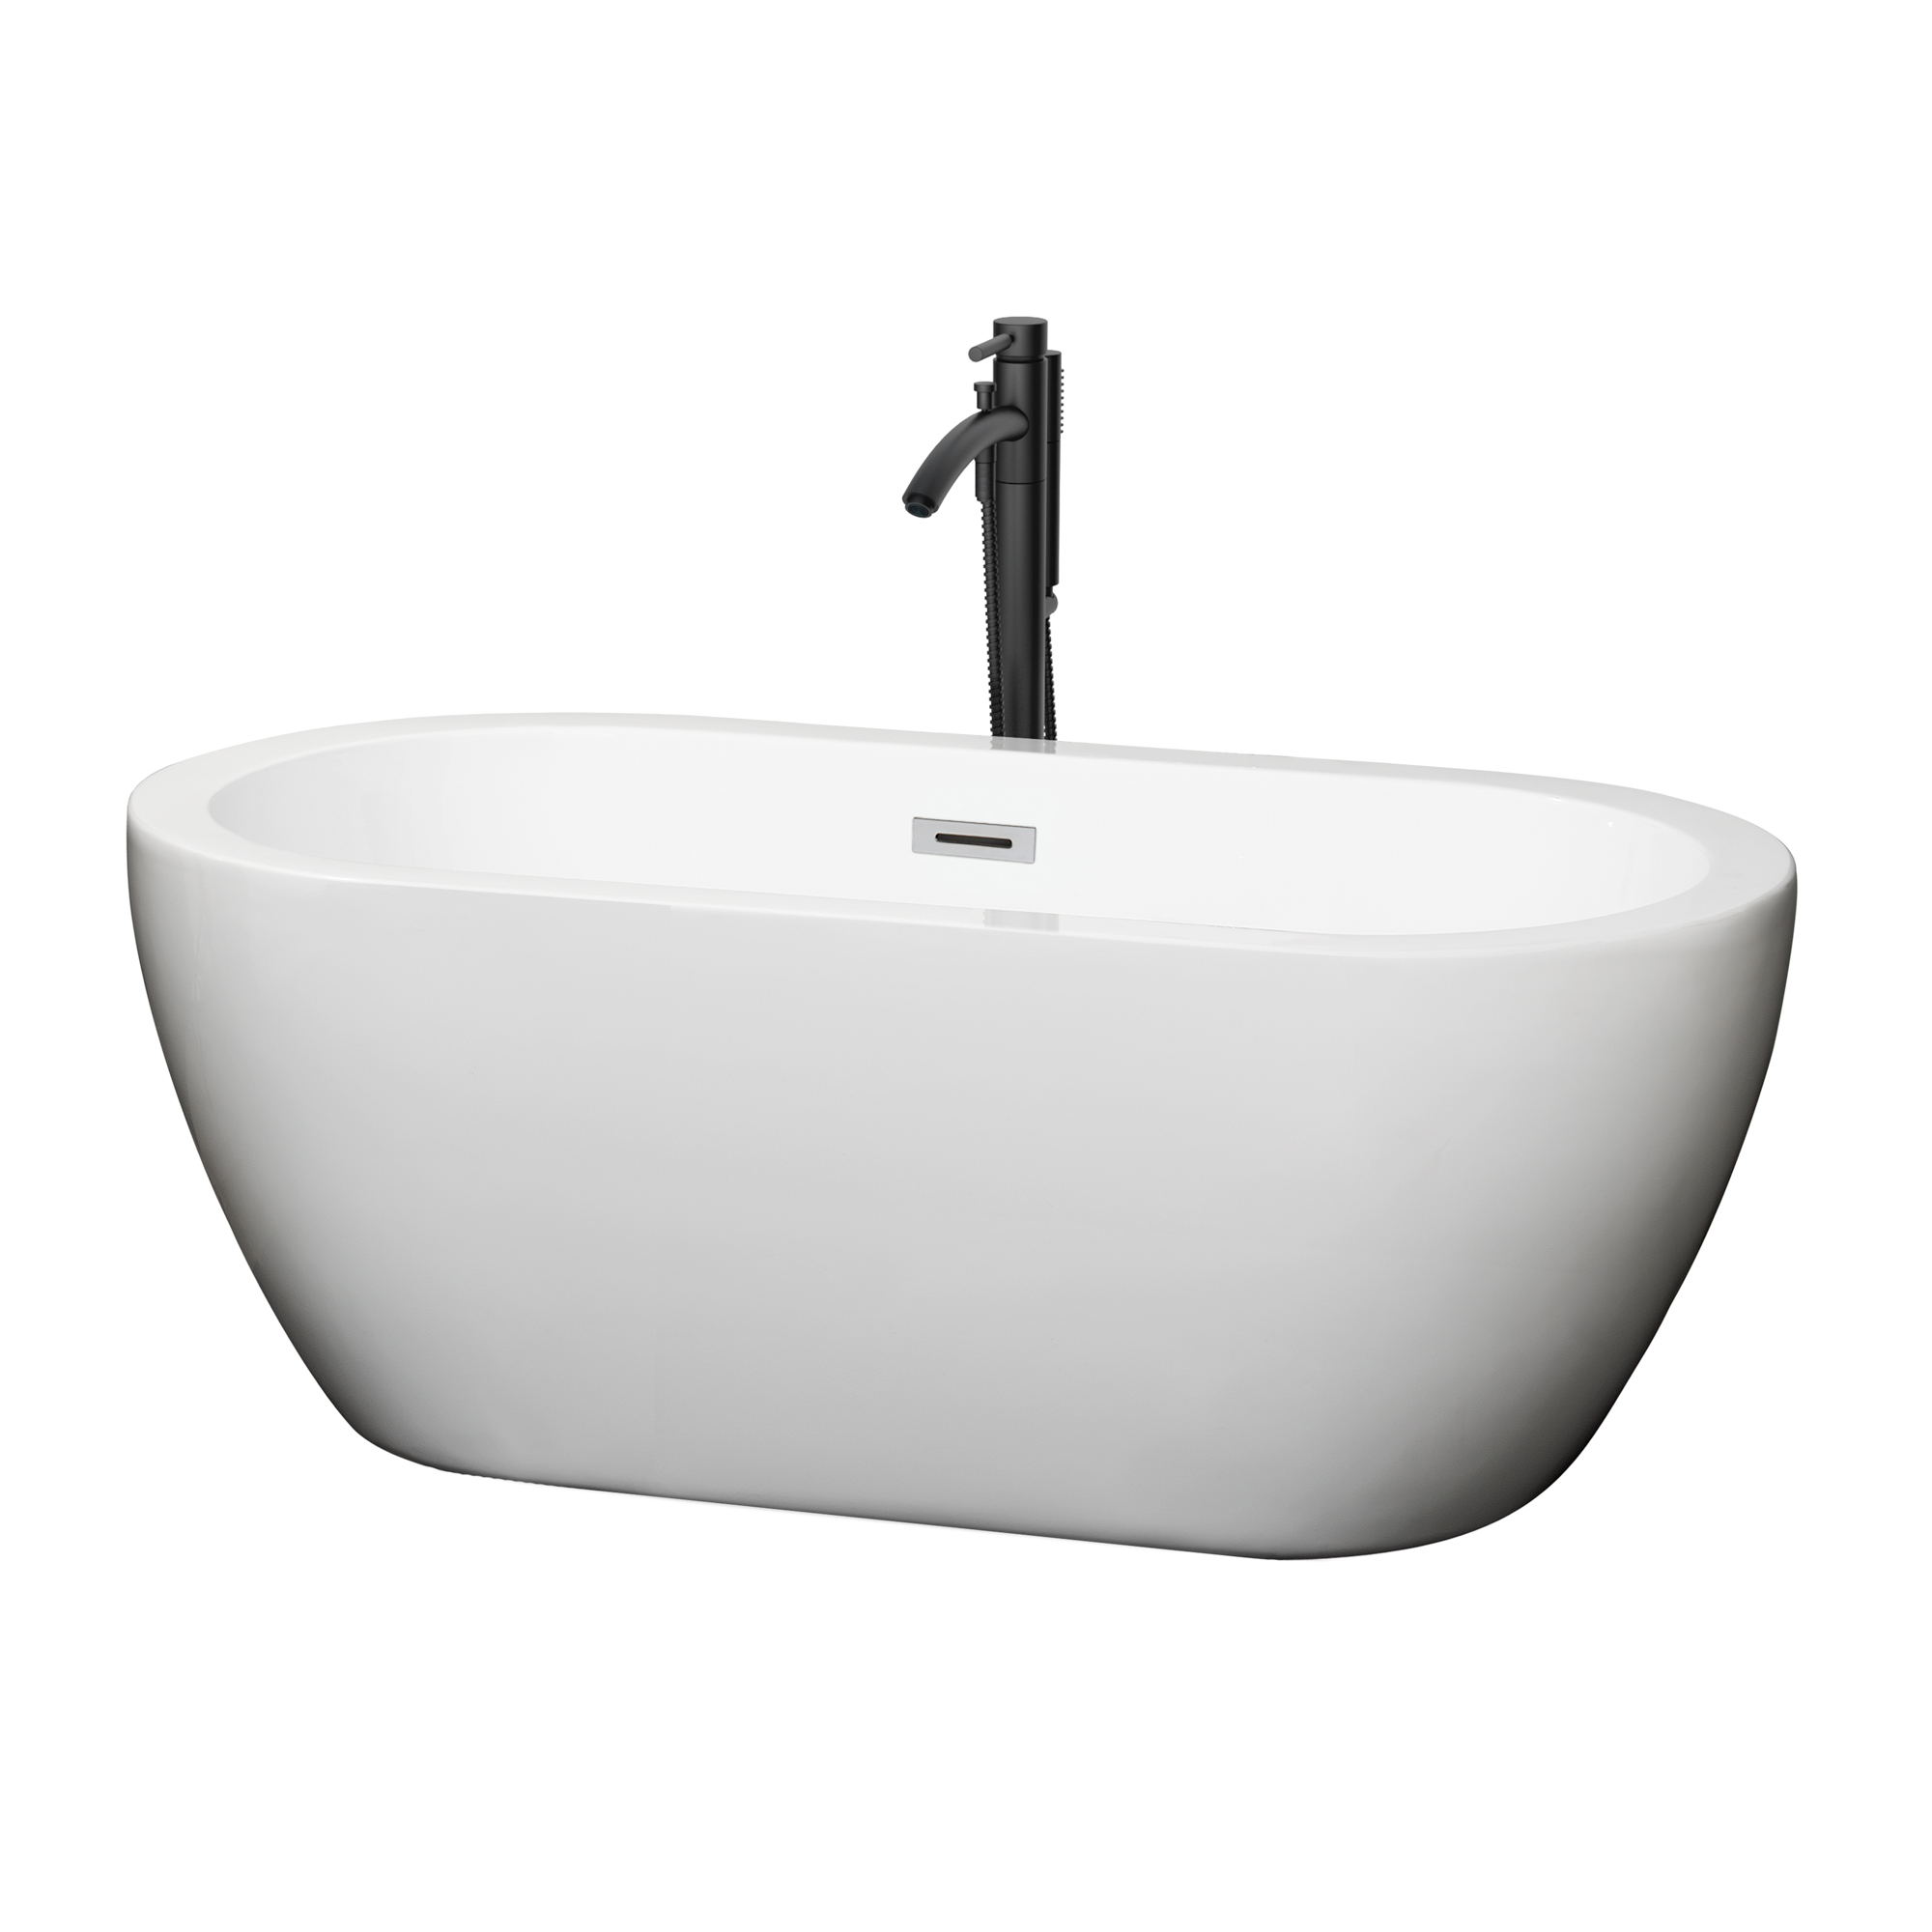 60" Freestanding Bathtub in White with Polished Chrome Trim and Floor Mounted Faucet in Matte Black Finish